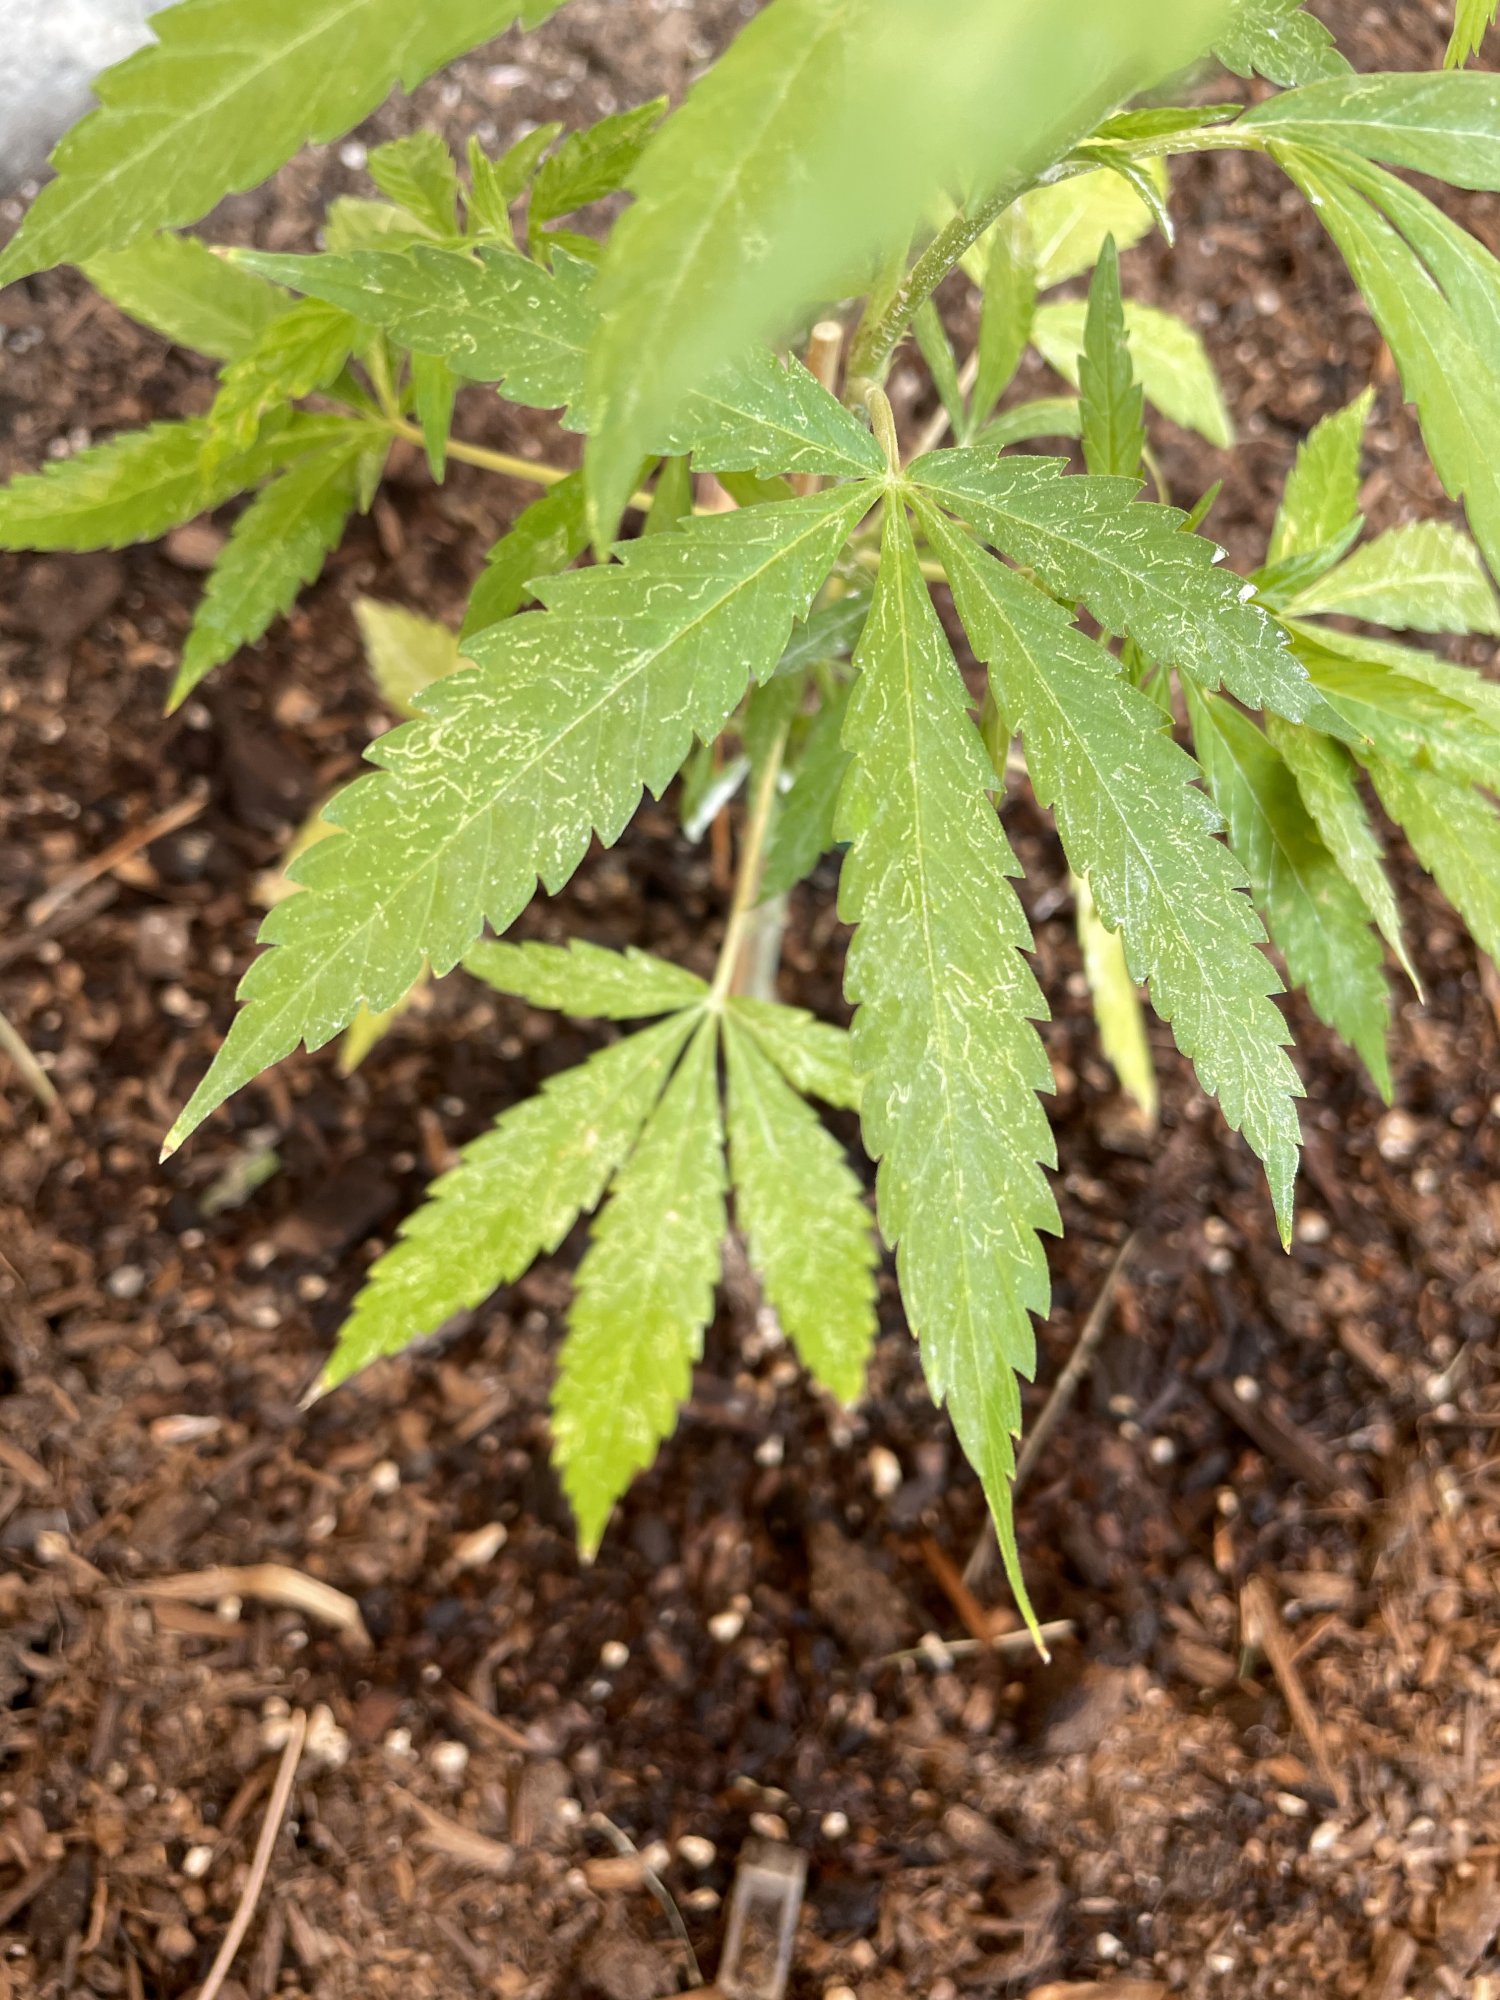 Whats wrong with my leaves